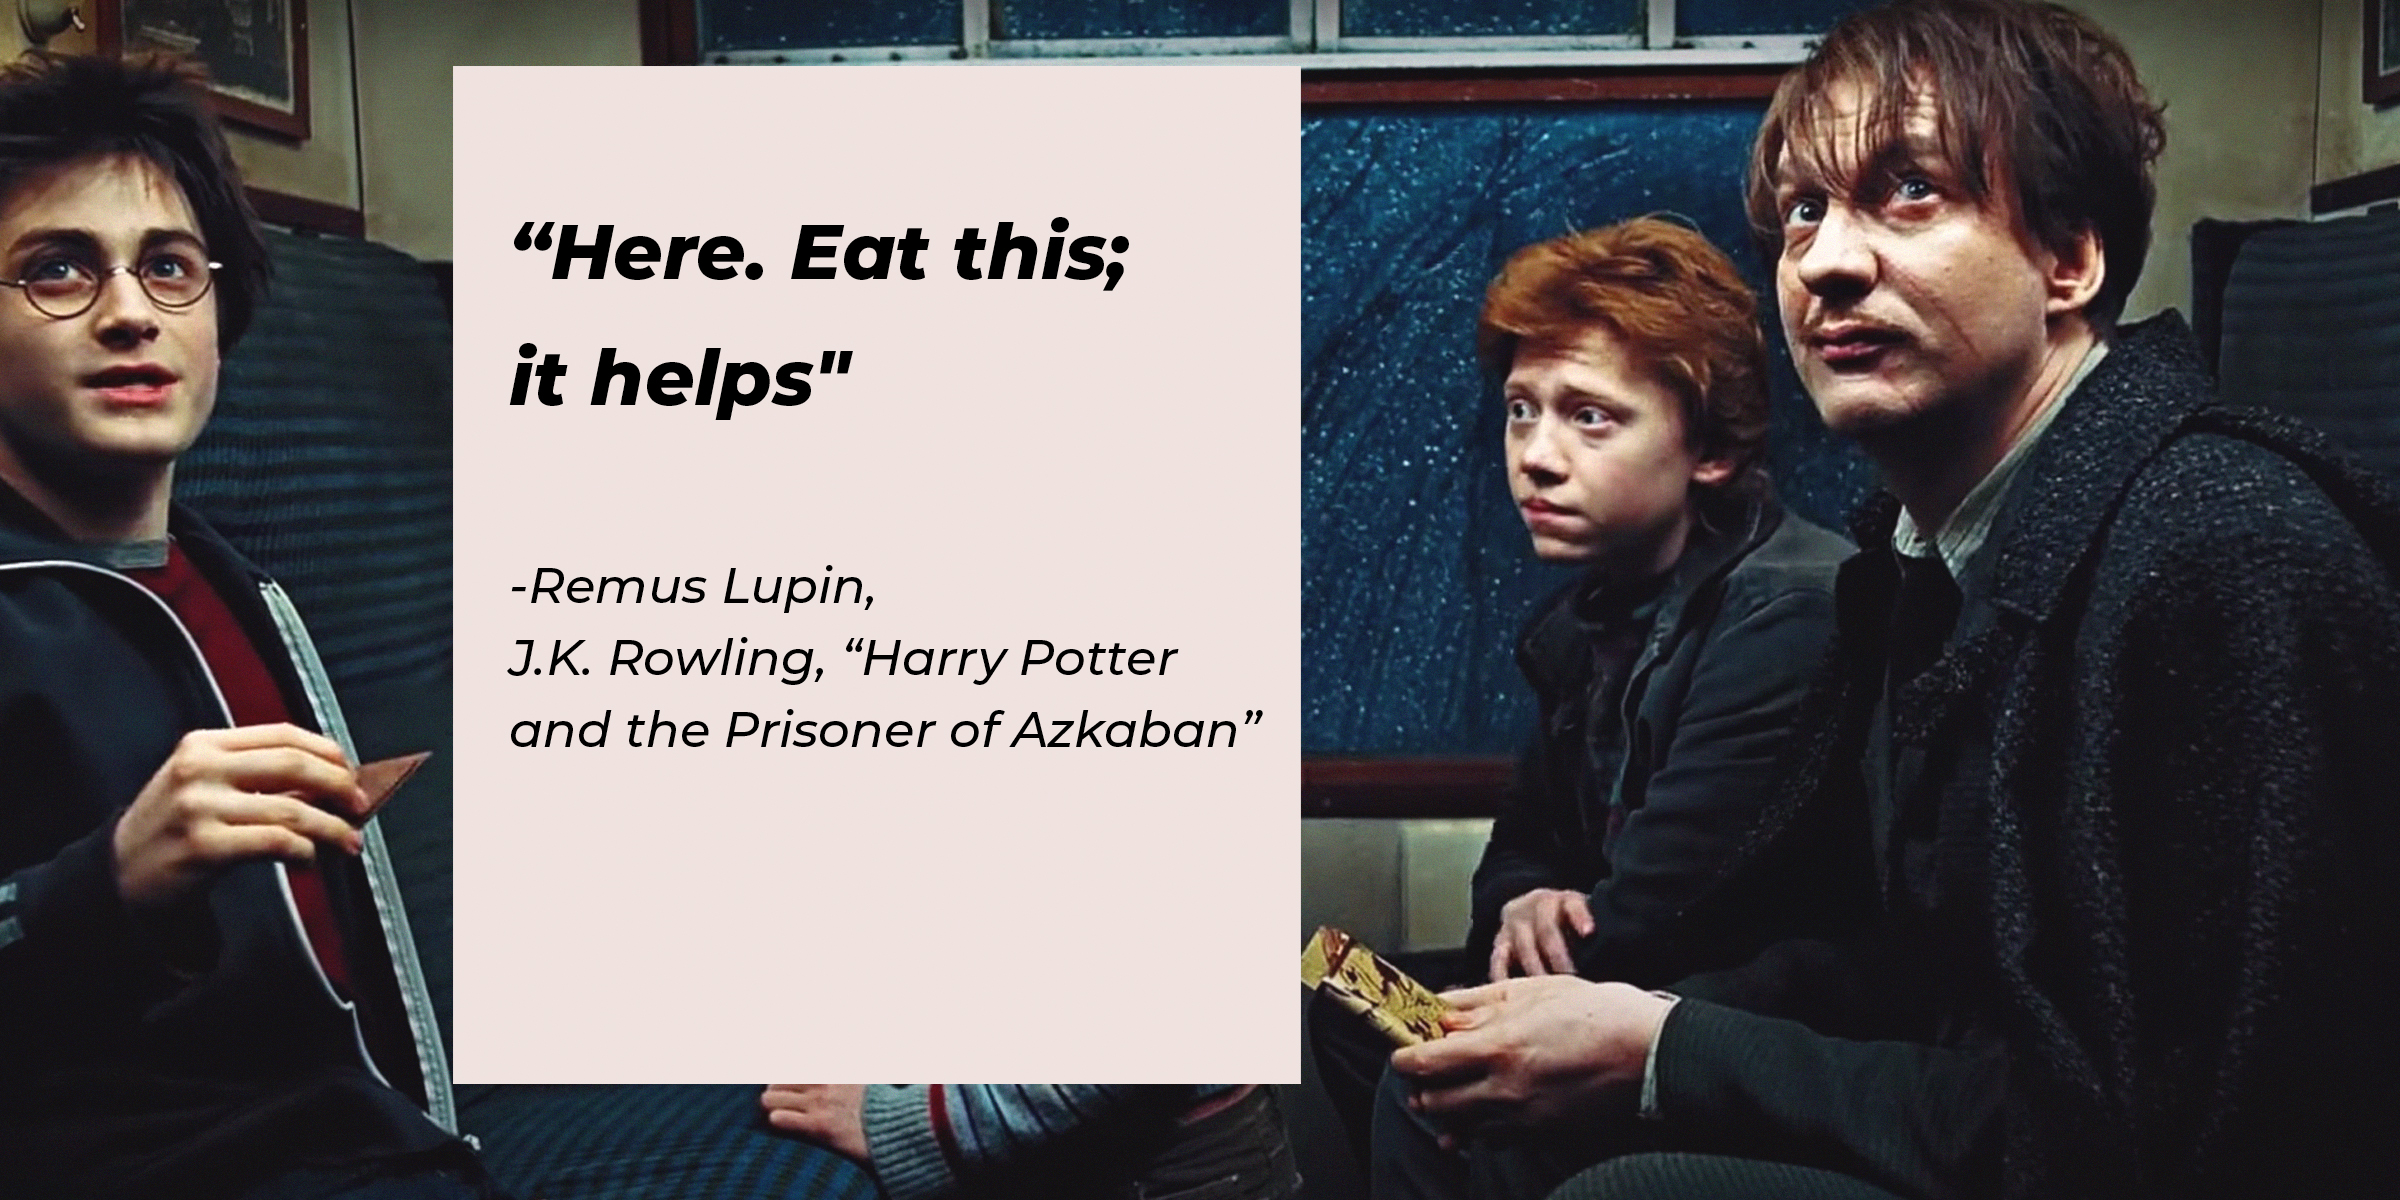 Ron Weasley, Hermione Granger, Harry Potter and Remus Lupin on the Hogwarts Express together with a quote by Lupin: “Here. Eat this; it helps." | Source: facebook.com/theouranhostclub